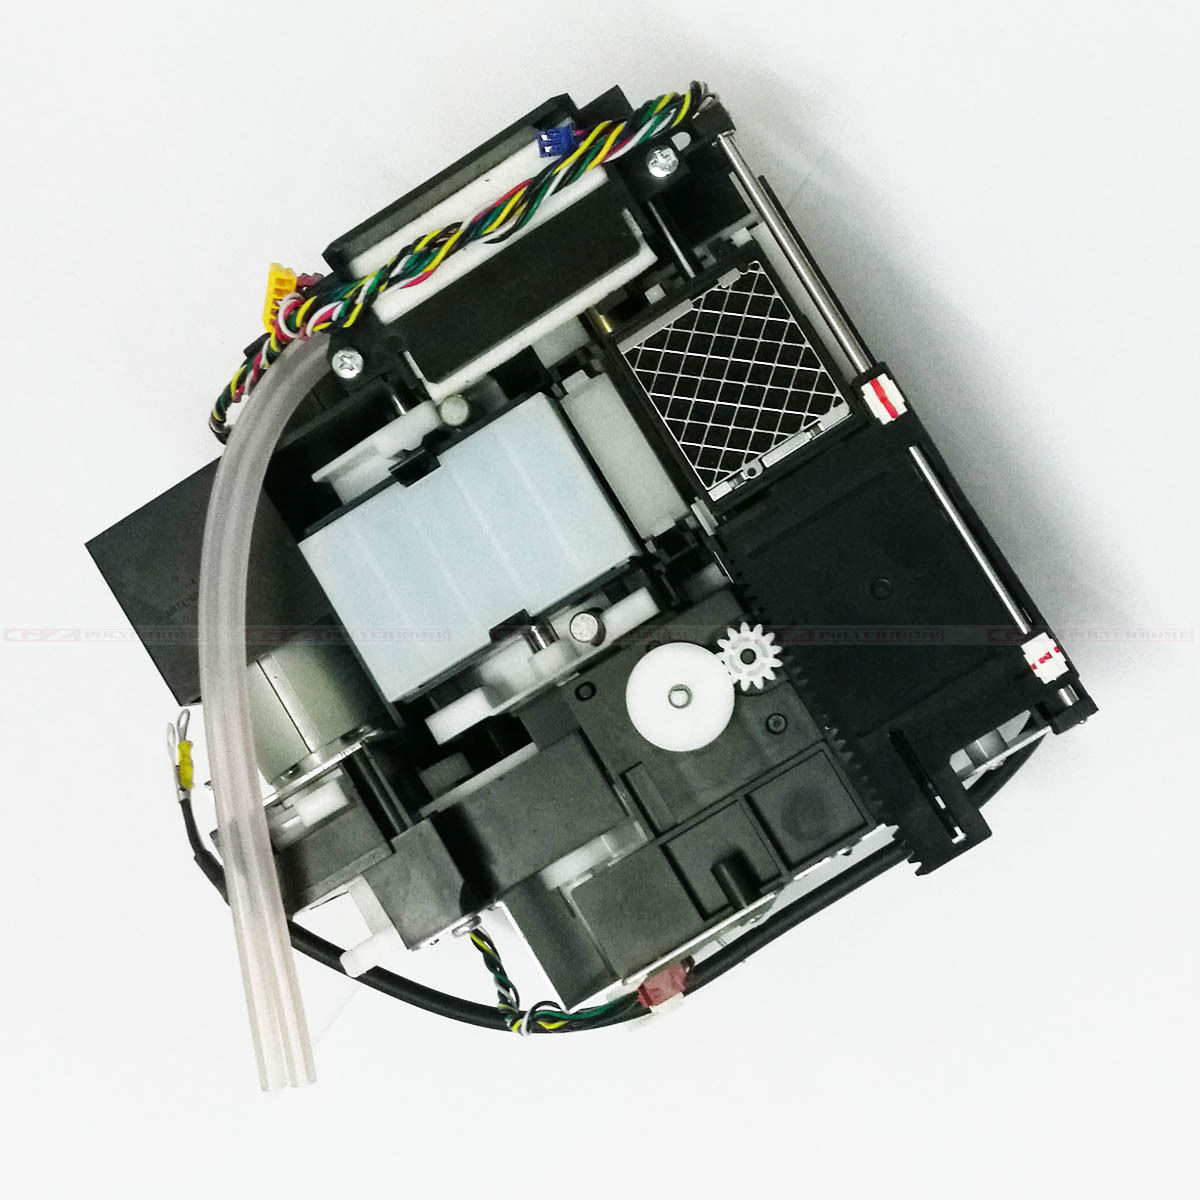 Epson F2180 ink pad assembly